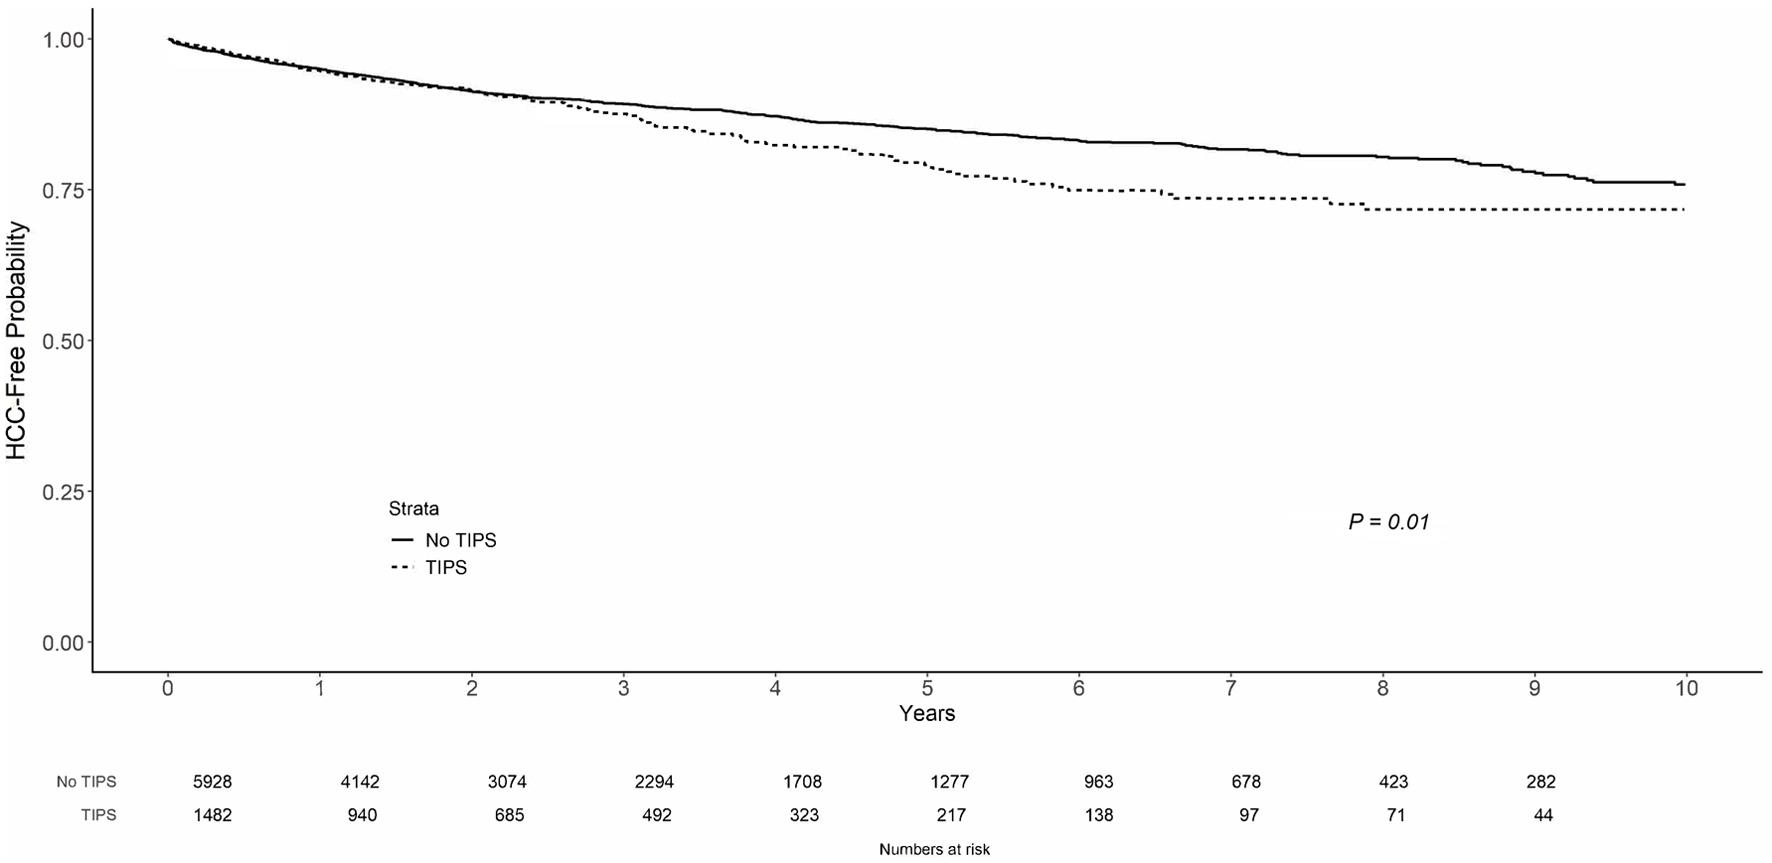 Kaplan Meier Curve for HCC Incidence in TIPS vs. non-TIPS Patients.